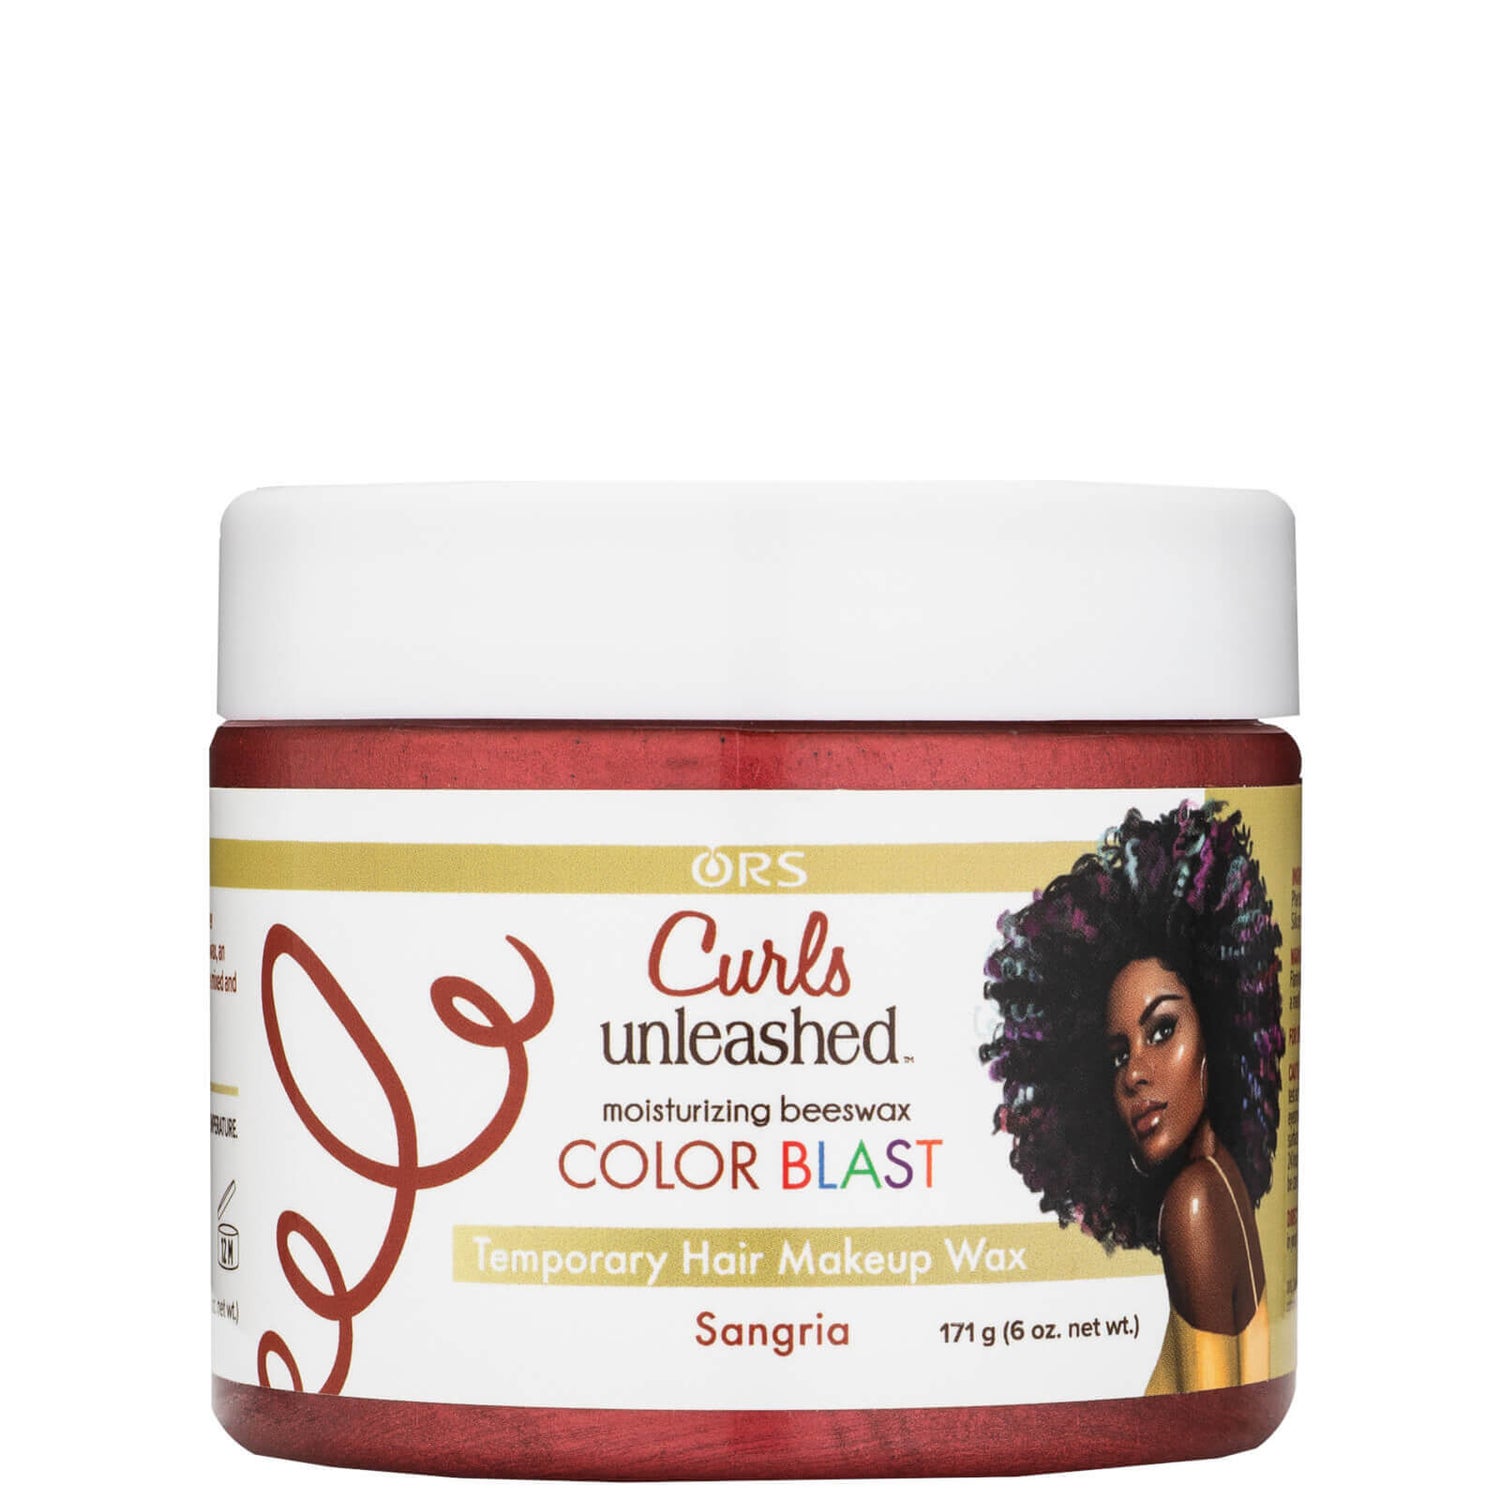 Hair Makeup Wax Curls Unleashed Colour Blast Temporary - Sangria ORS